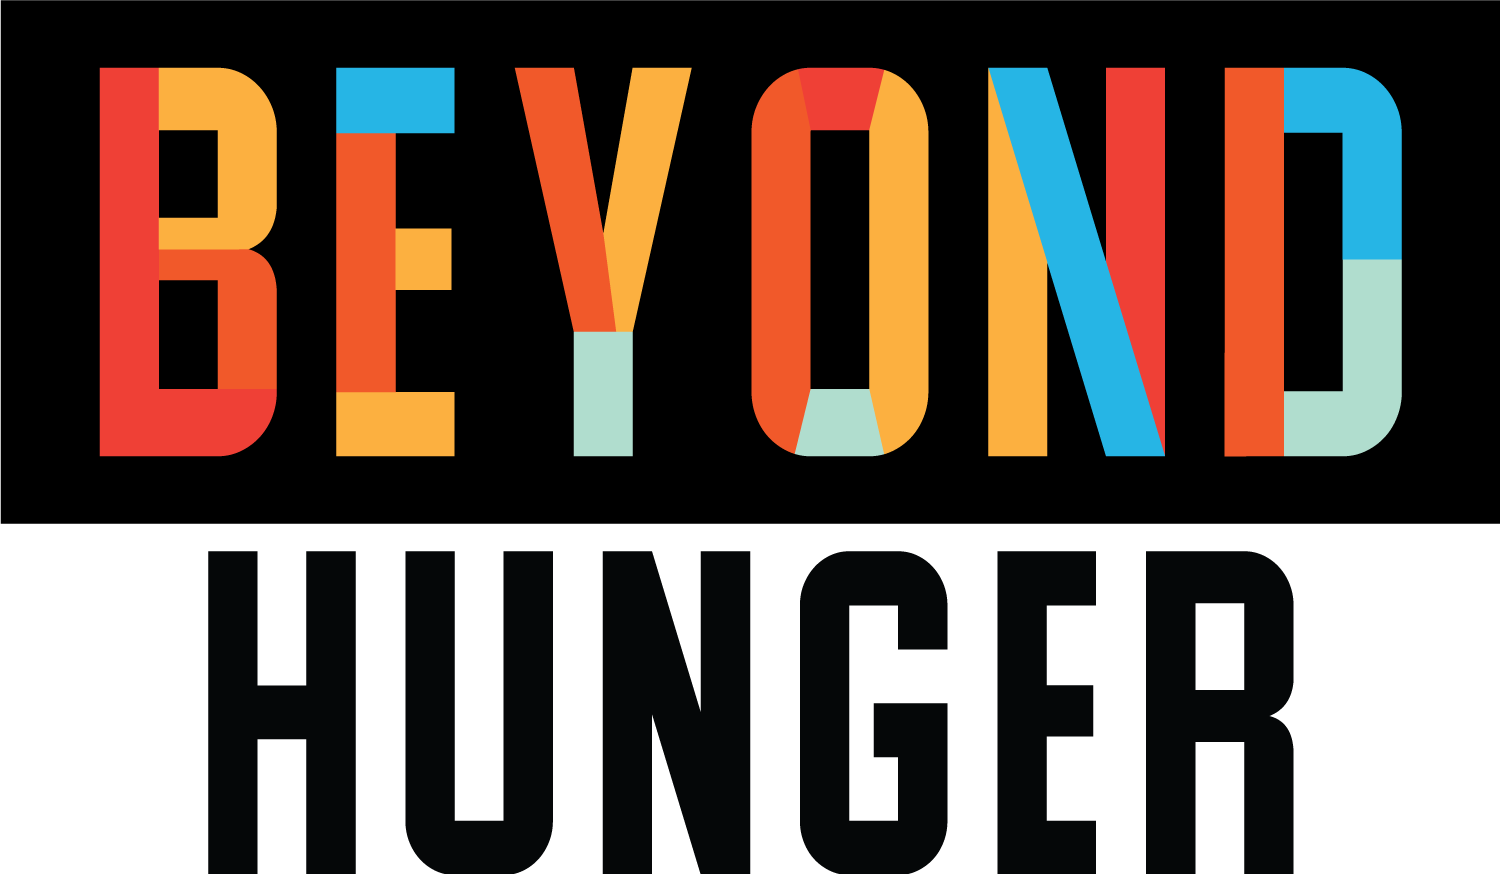 Beyond Hunger is a Chicago area non-profit whose mission is harnessing the power of communities to end hunger.